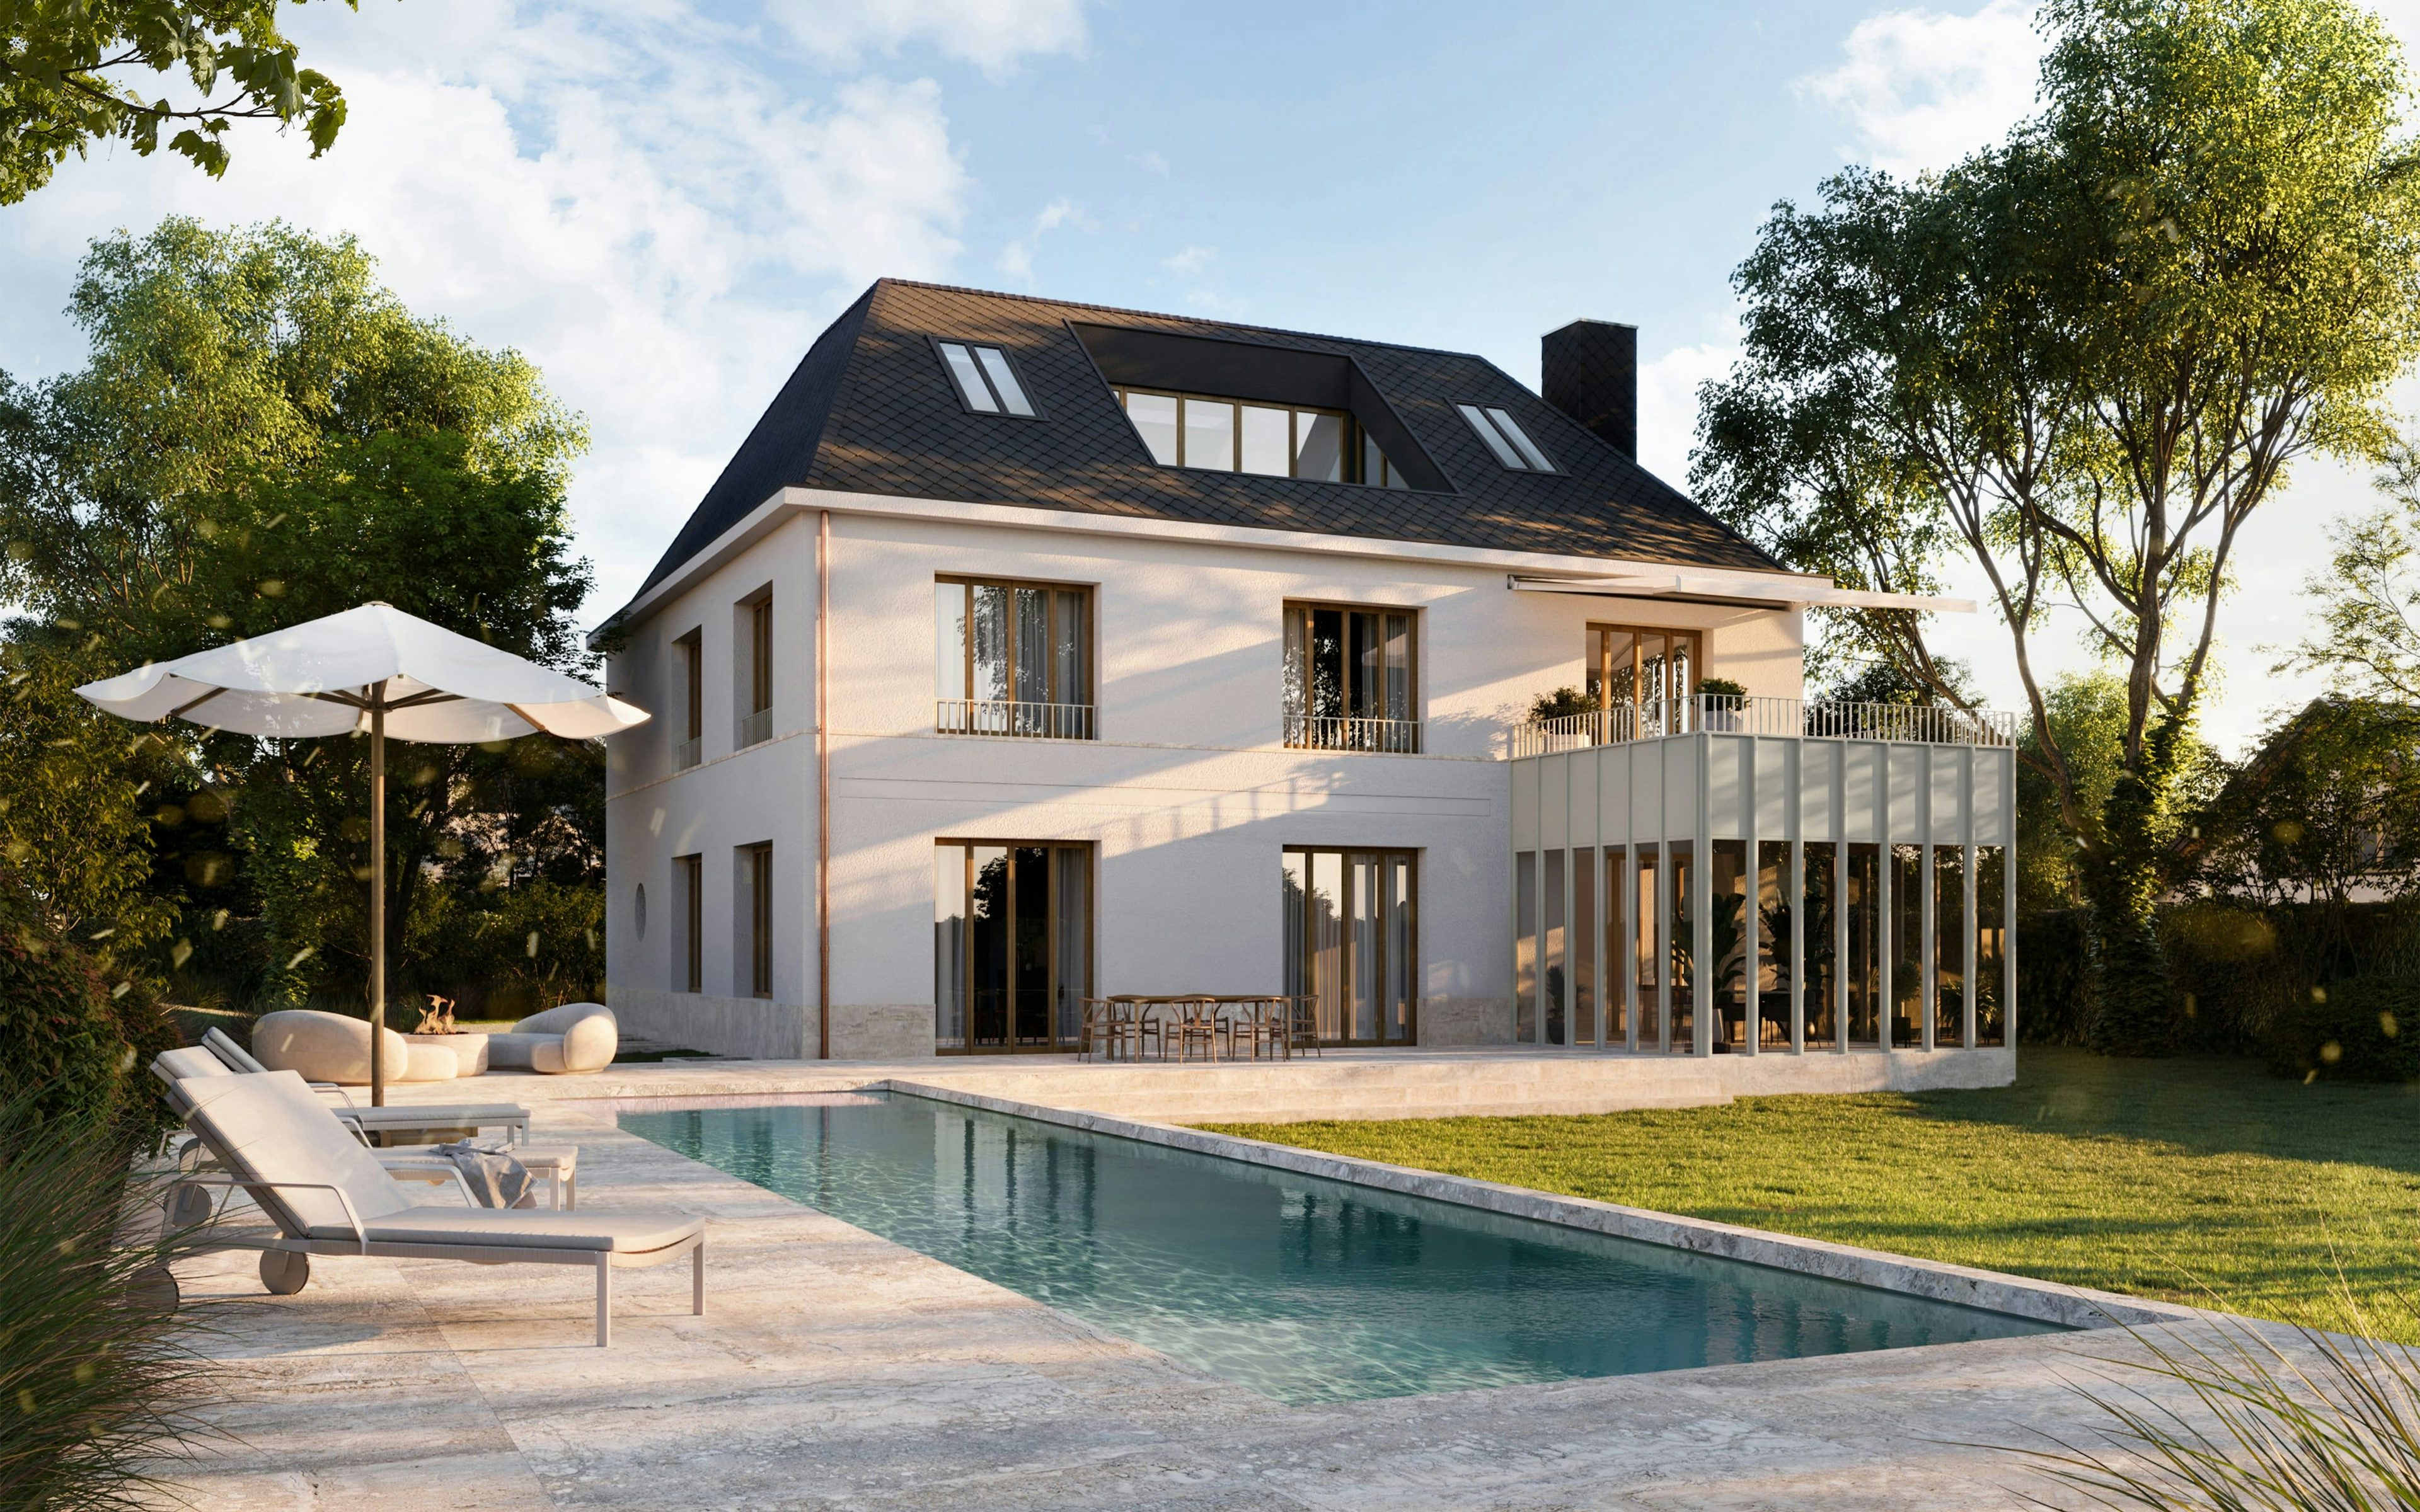 3D Architectural Visualization of private elegant house with pool with facade variations